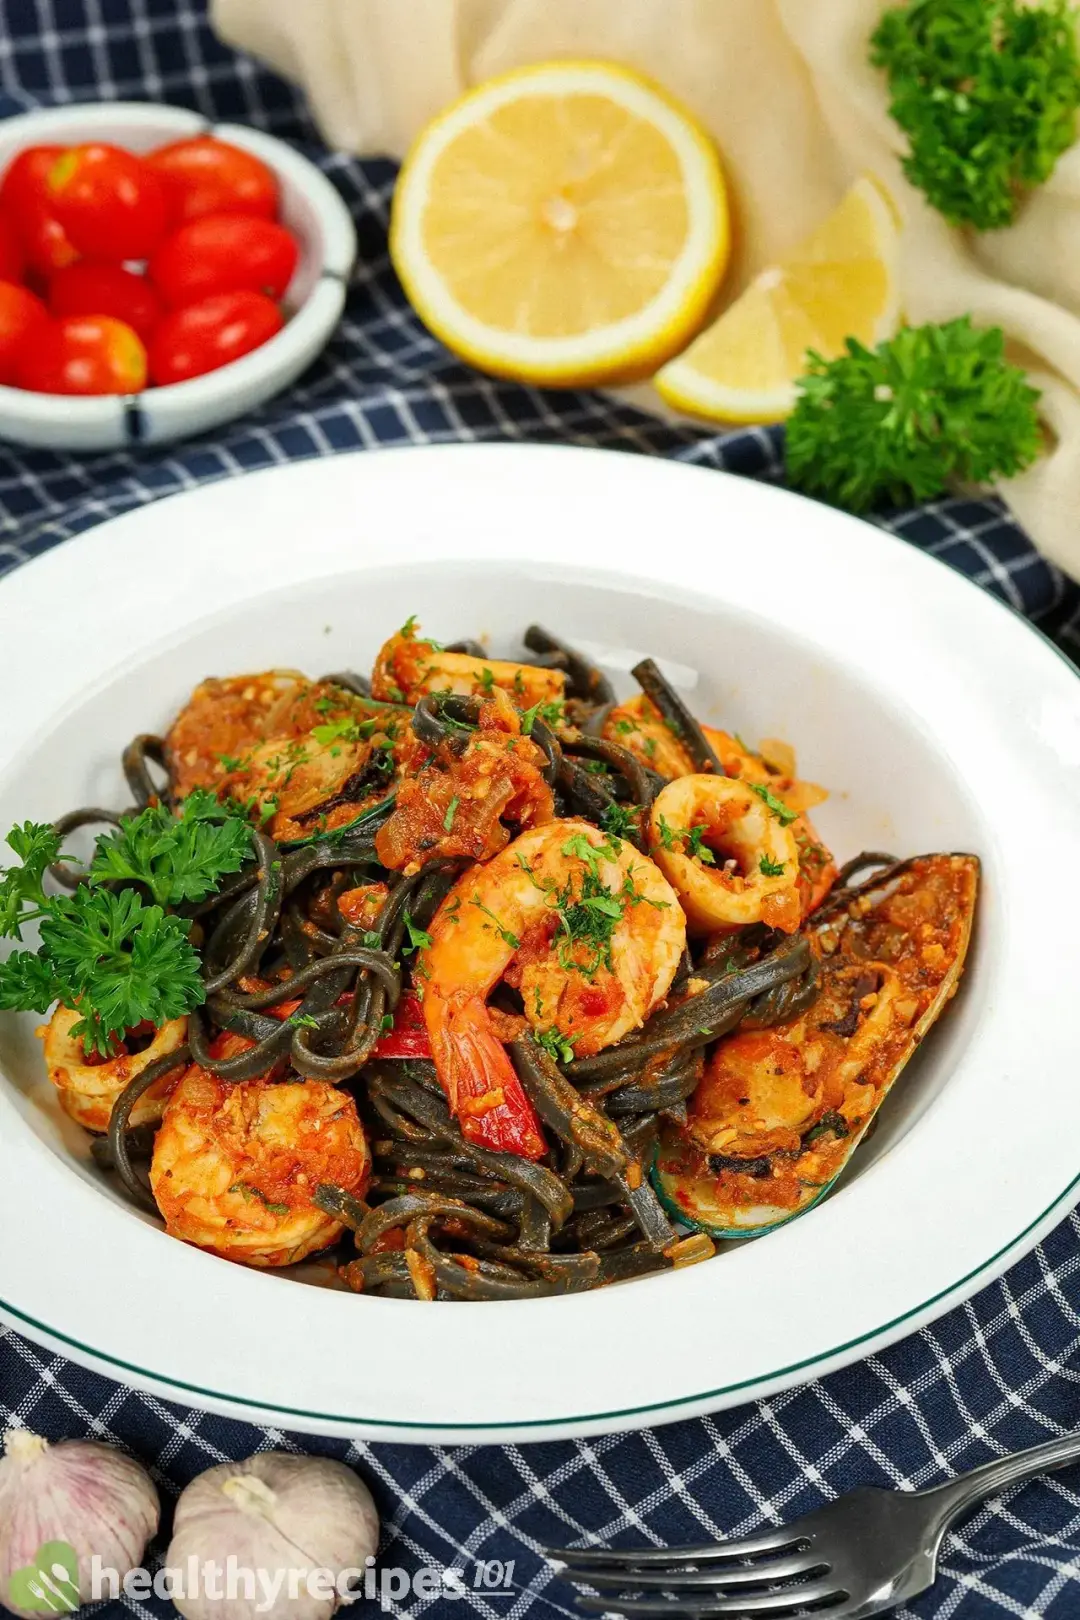 How to Store and Reheat Squid Ink Seafood Pasta